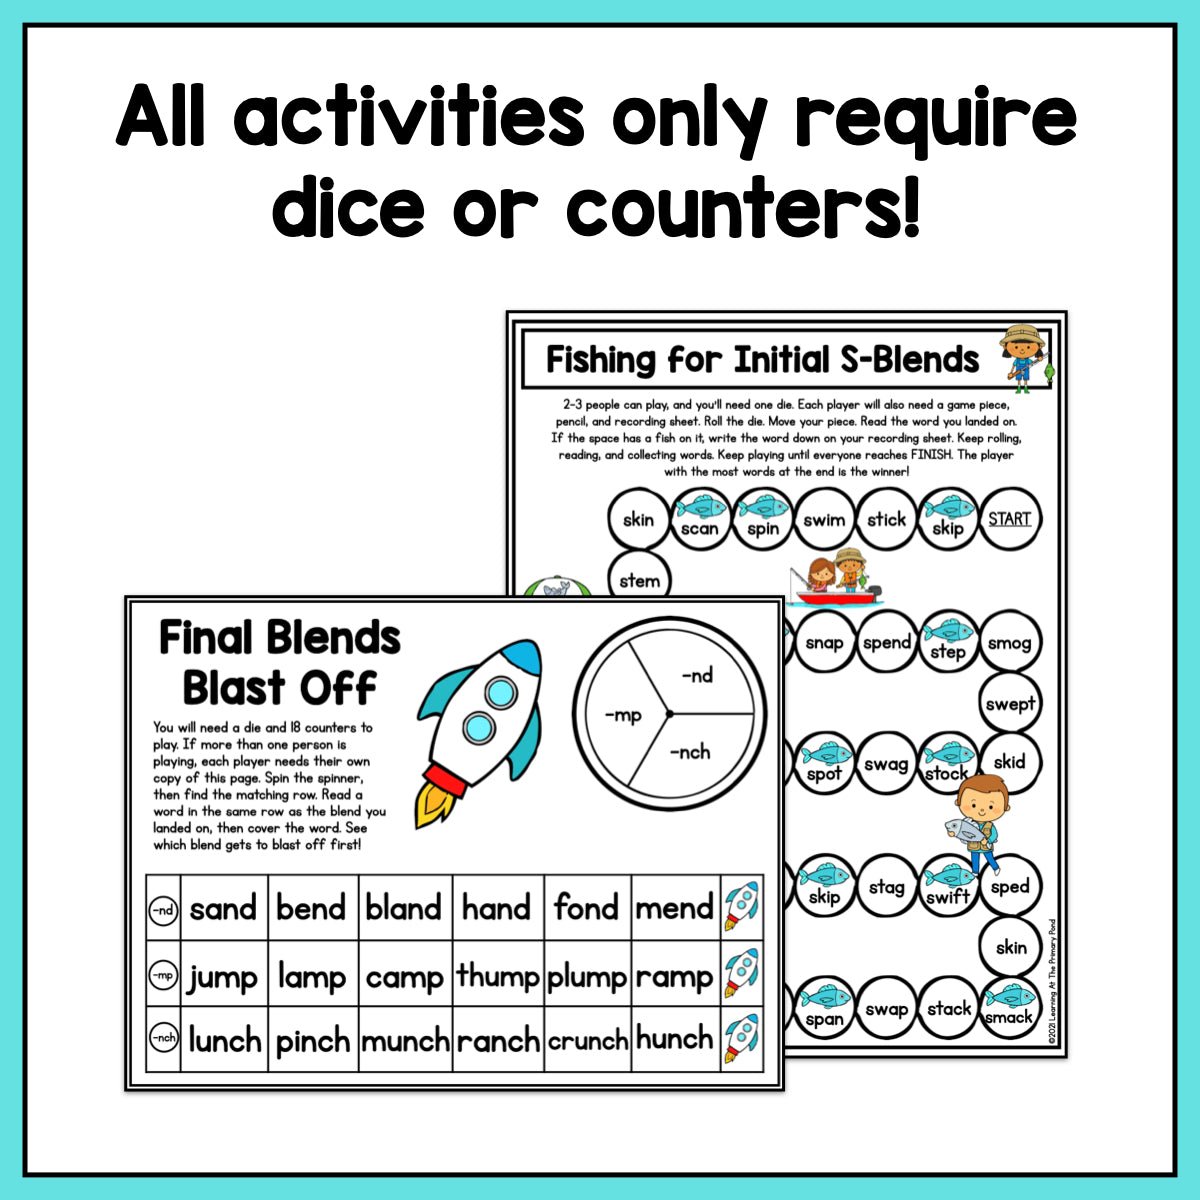 Consonant Blends Games: First Grade No-Prep Phonics - learning-at-the-primary-pond